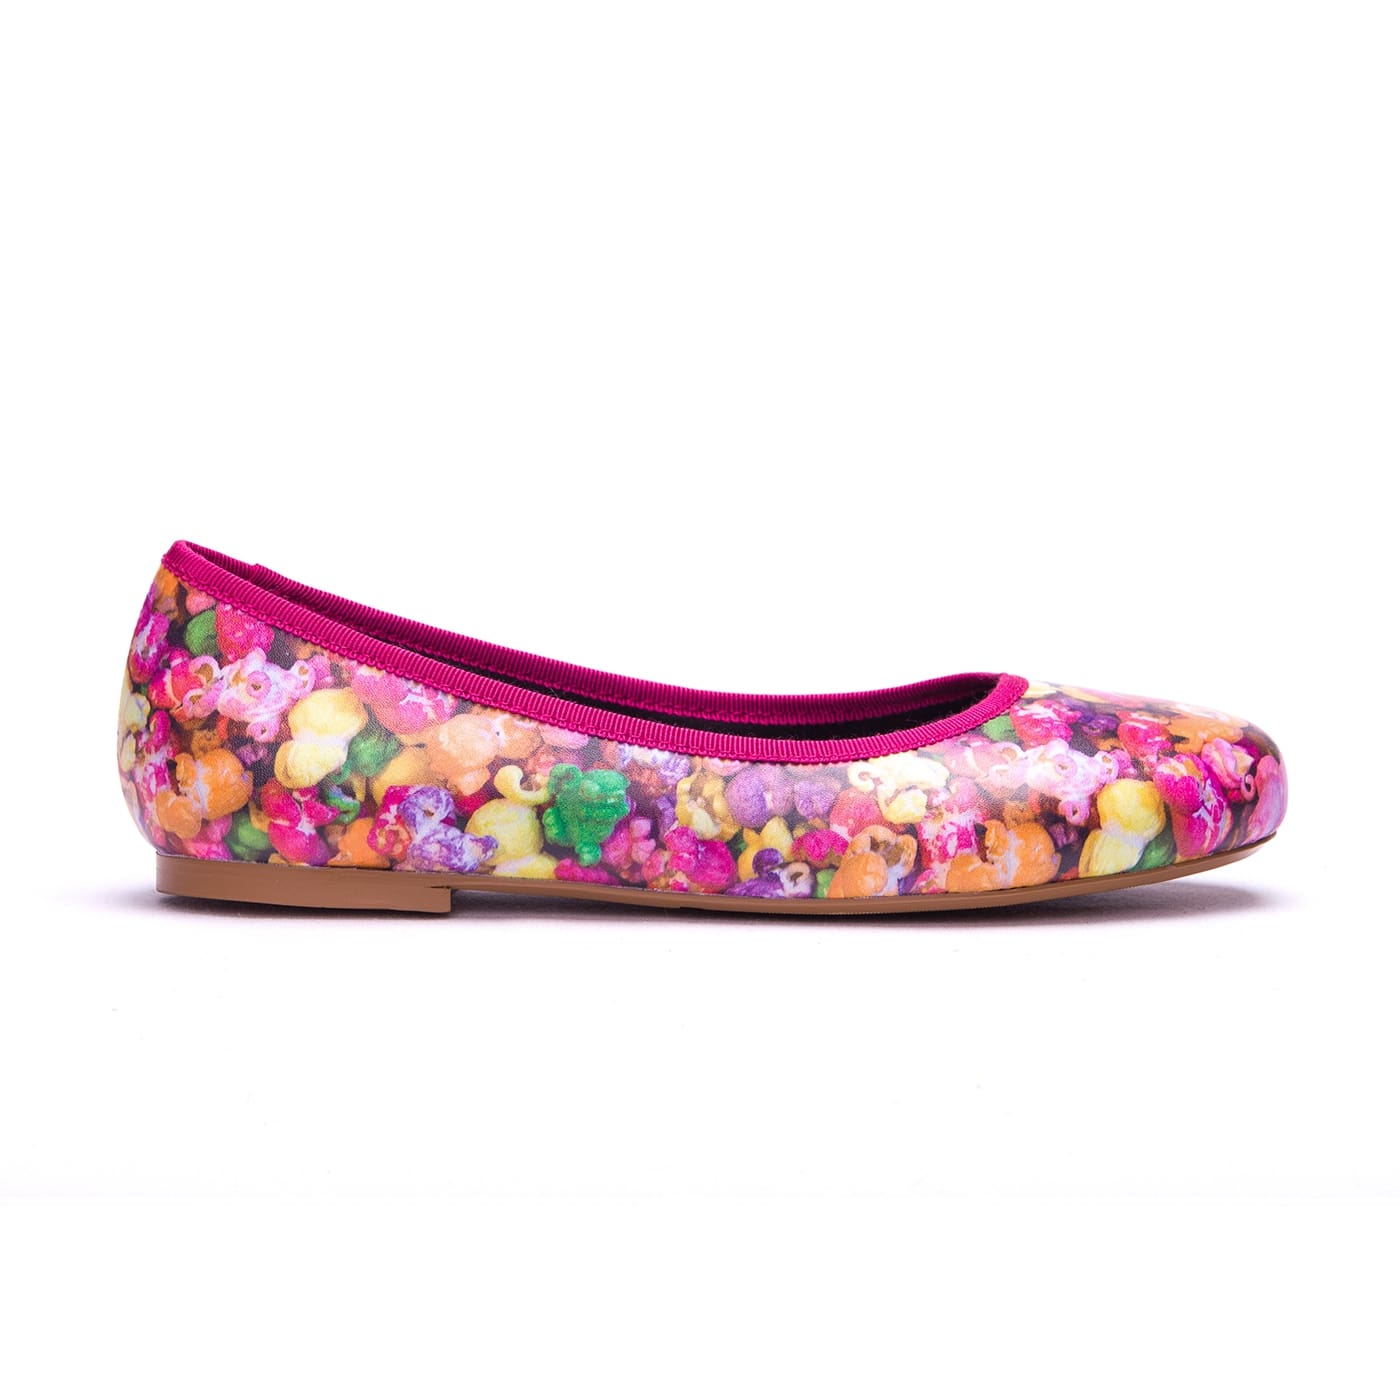 Rainbow Popcorn Ballet Flats by RainbowsAndFairies.com (Popcorn - Colourful - Lollies - Quirky Shoes - Slip Ons - Comfy Flats) - SKU: FW_BALET_PCORN_ORG - Pic 04